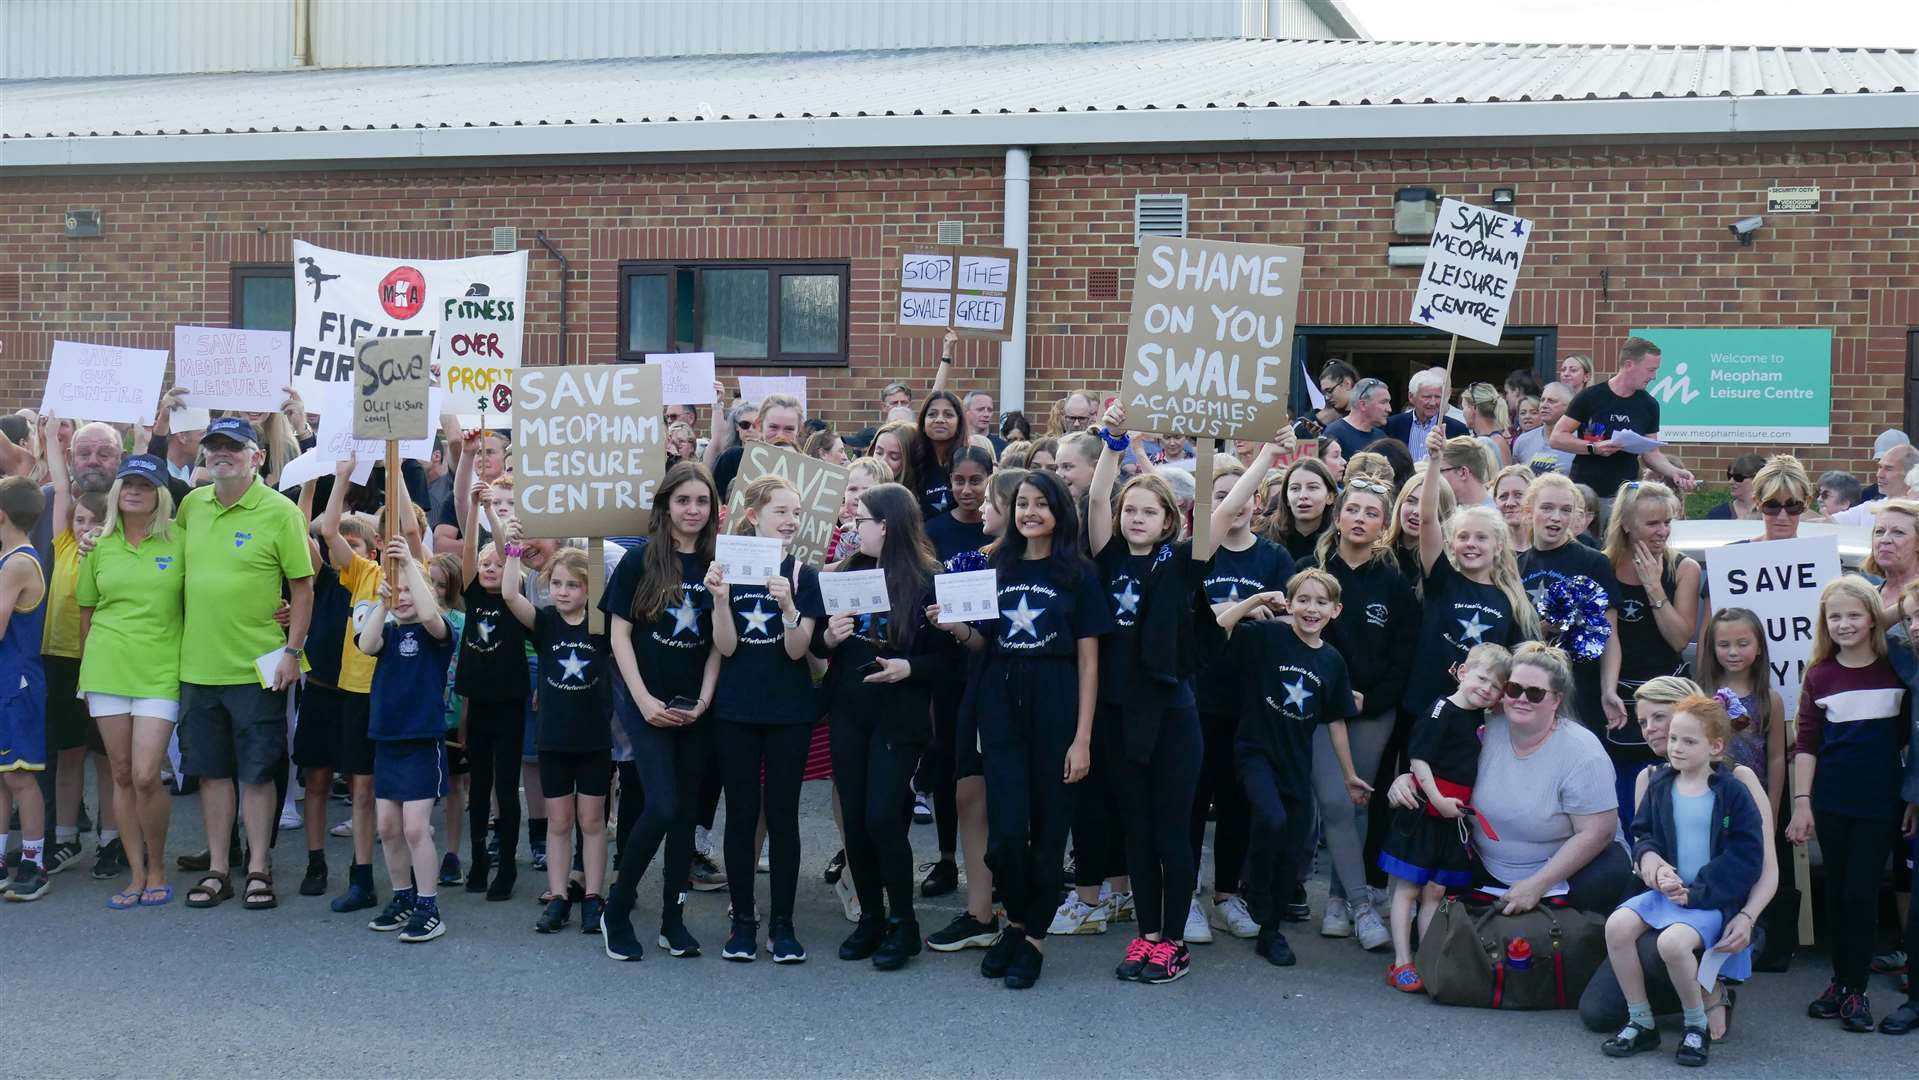 Many people turned out for Monday's protest at Meopham Leisure Centre. Photo: Anna Roberts